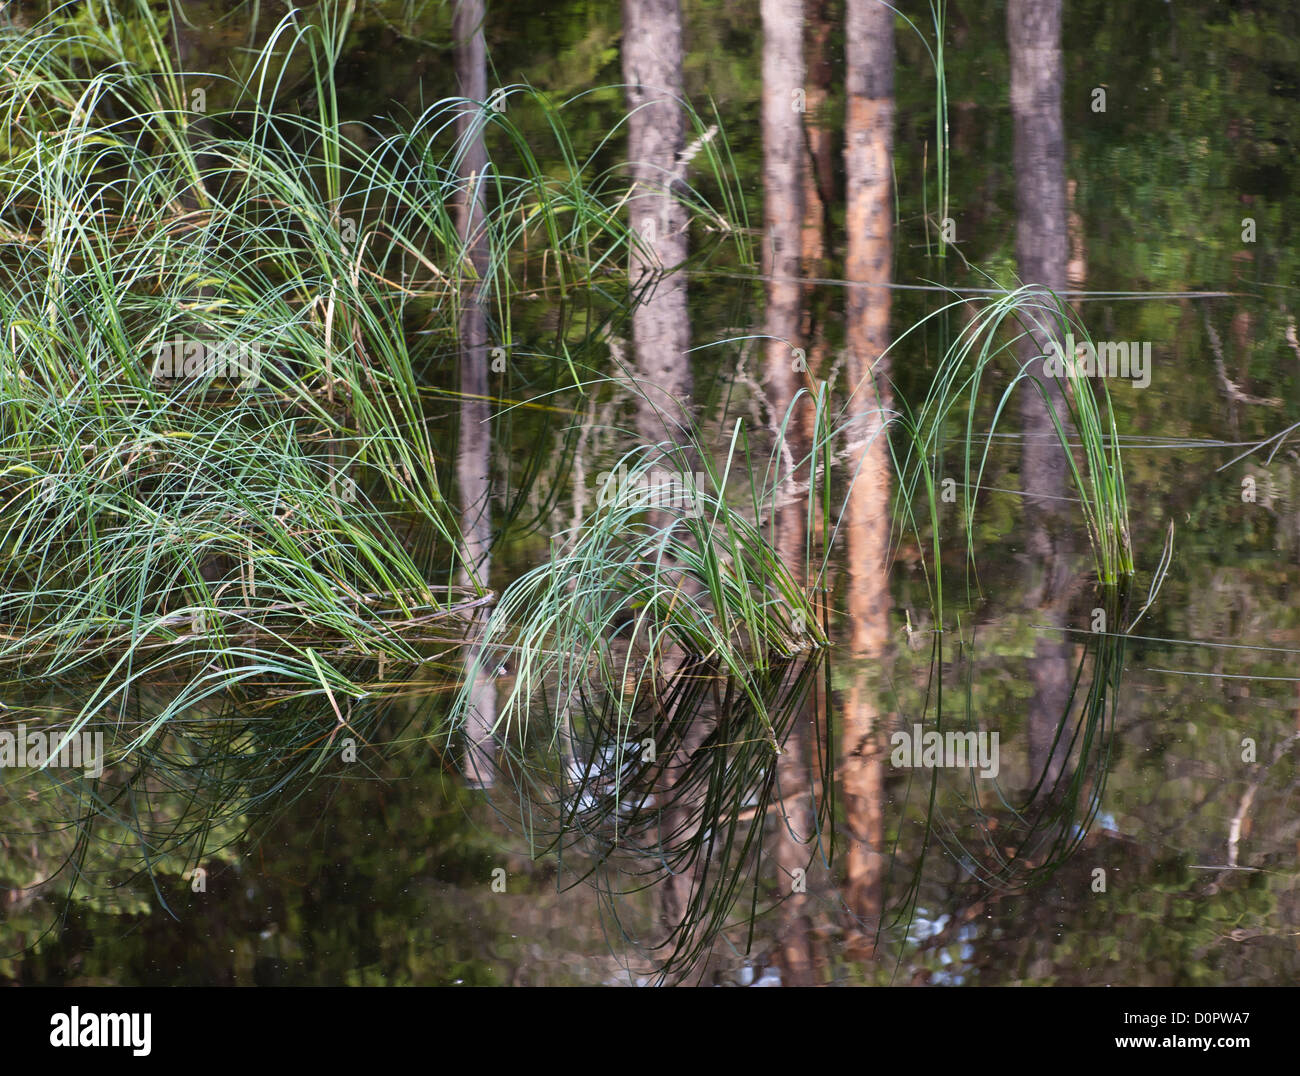 A lake or tarn in the forest surrounding Oslo Norway , tree trunks reflected in water with grass Stock Photo